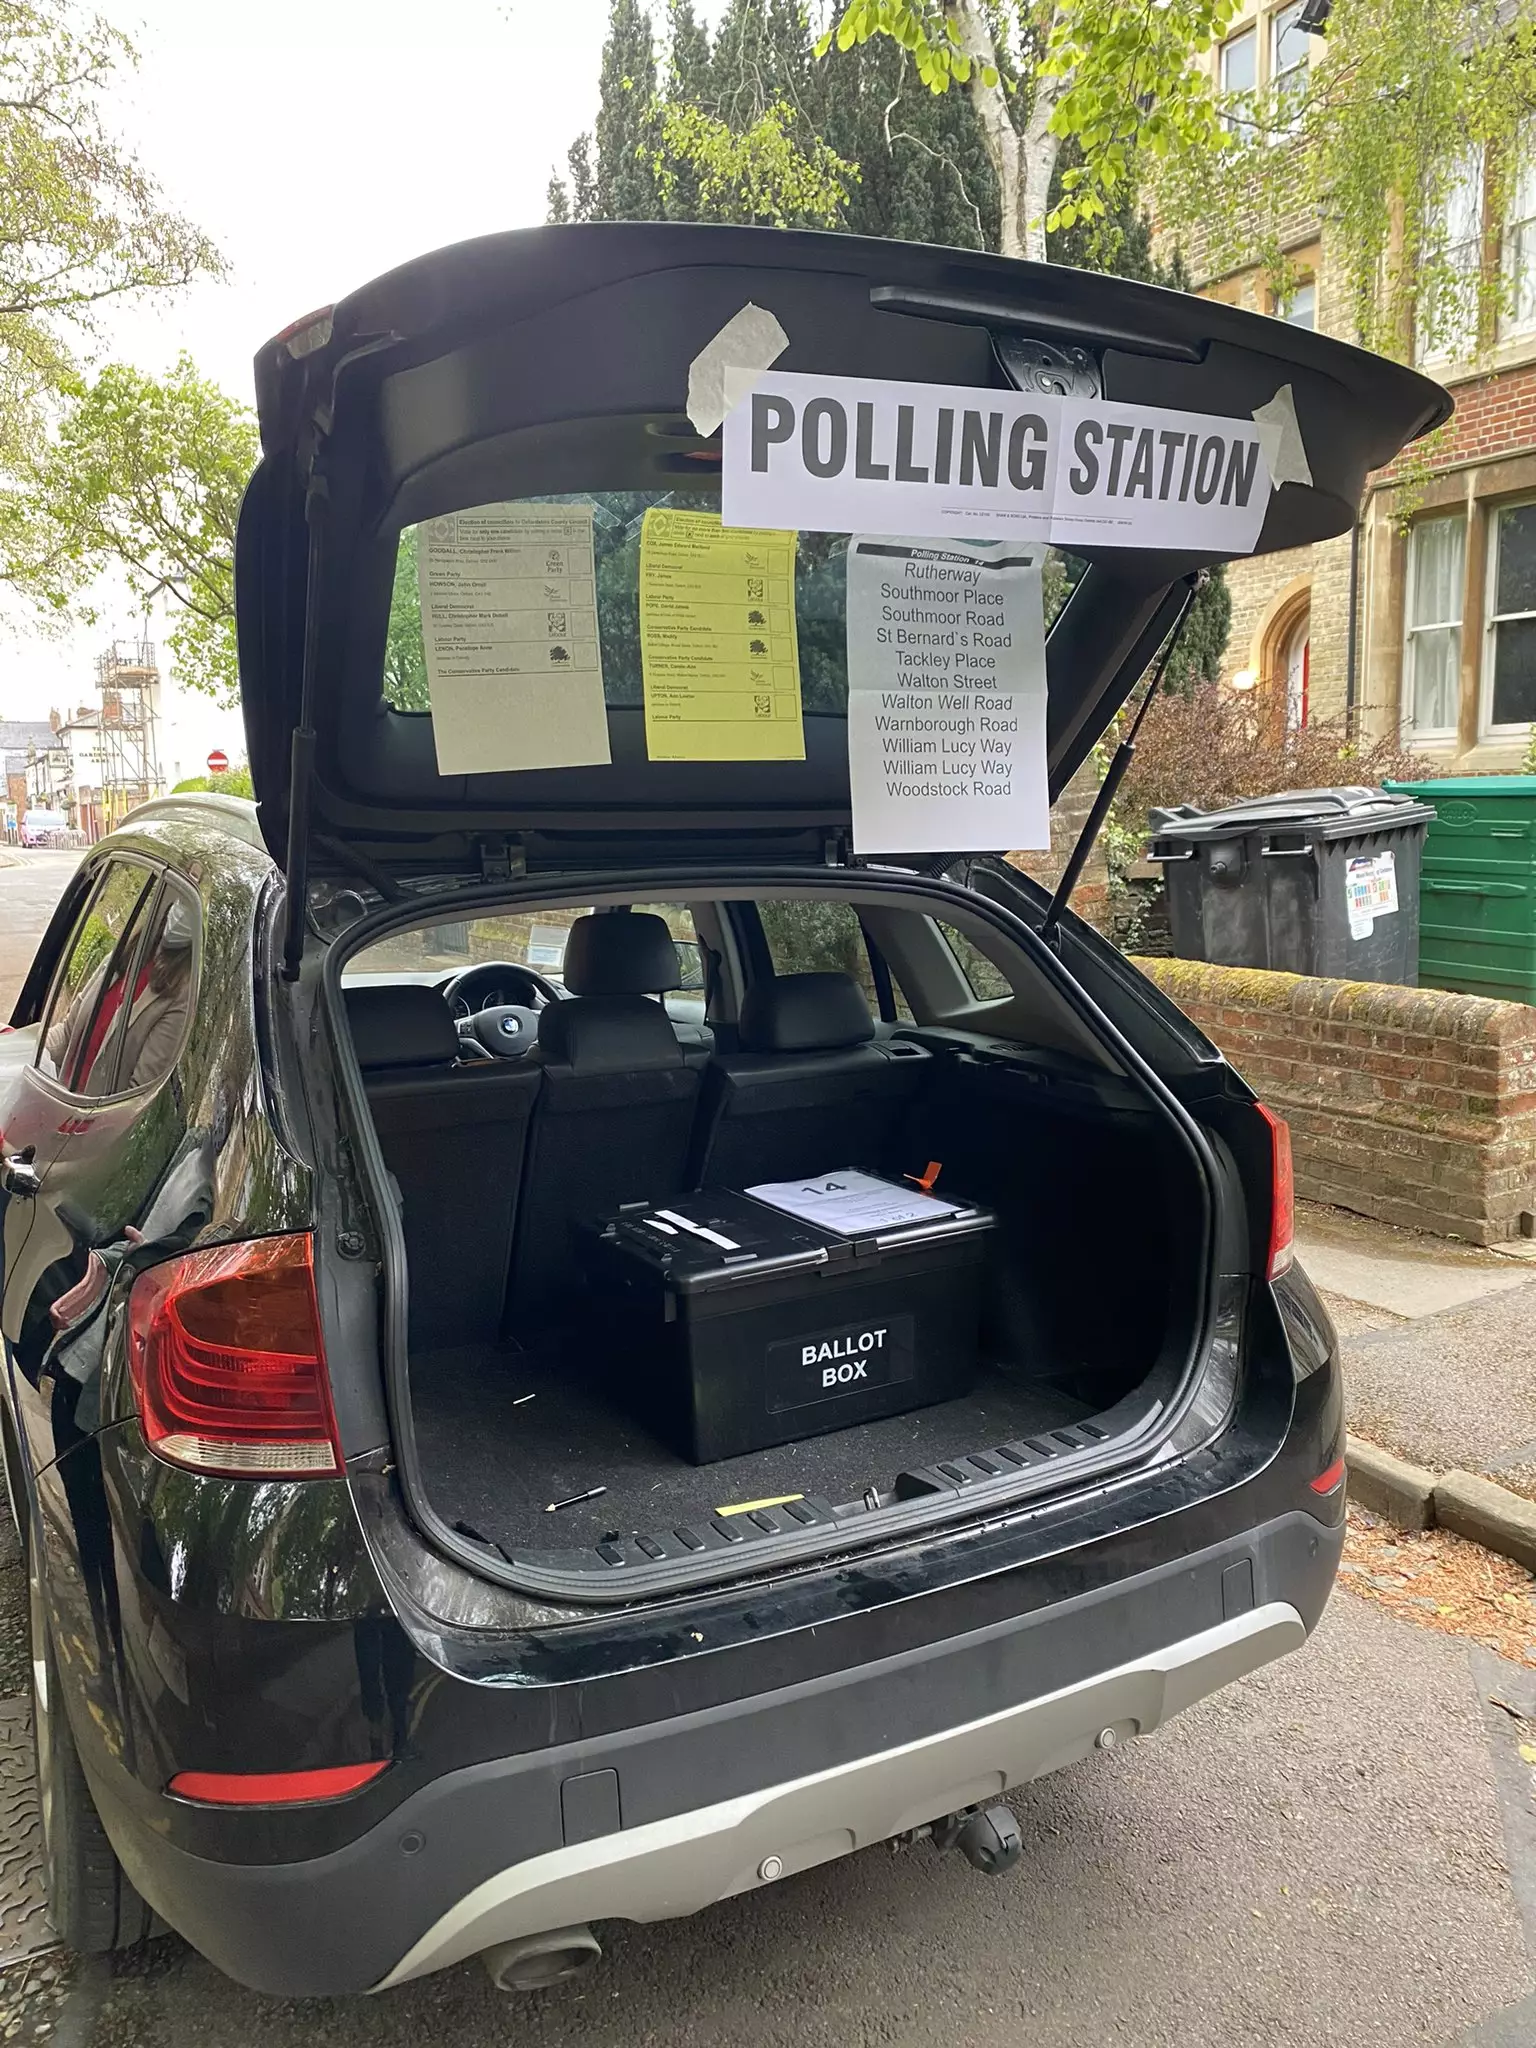 The polling station was briefly set up in a car boot.